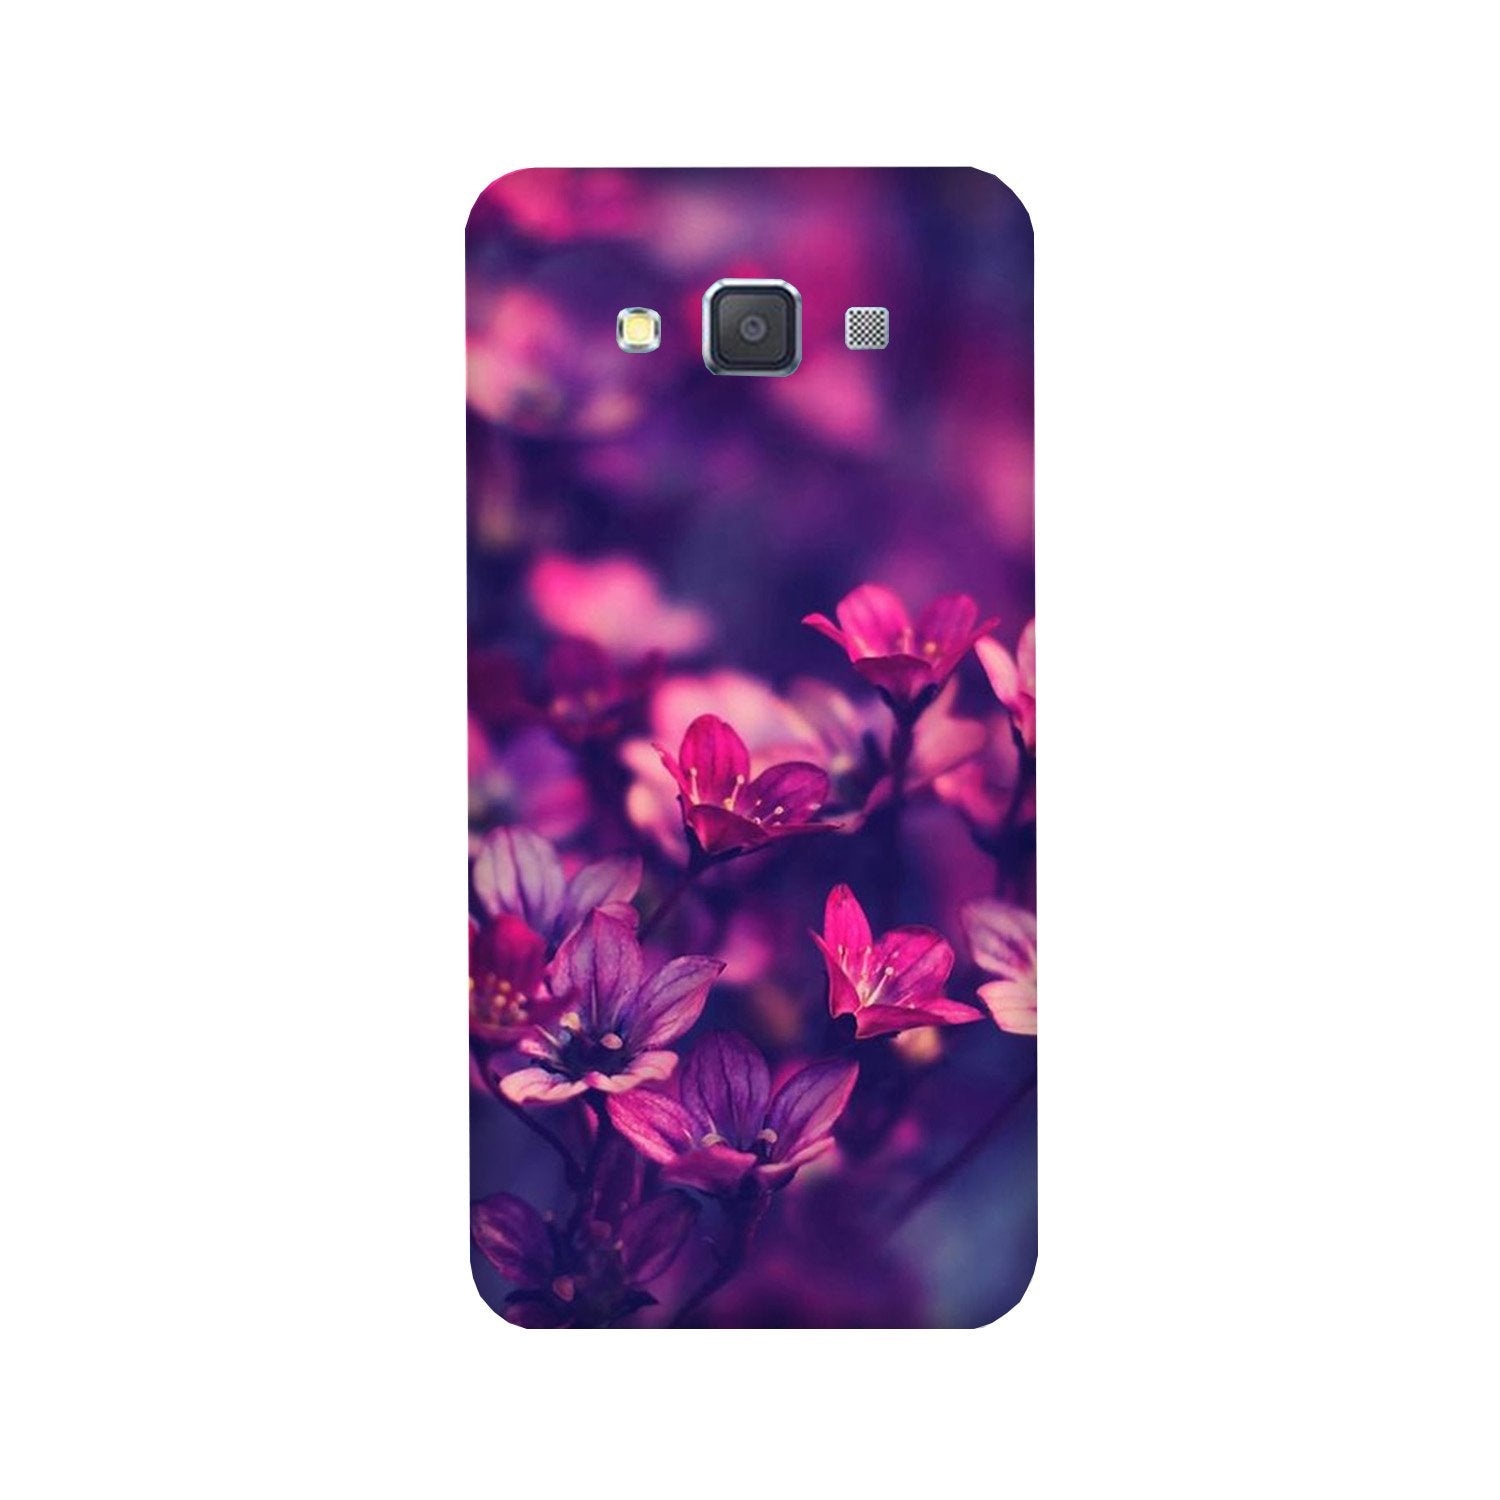 flowers Case for Galaxy Grand Prime